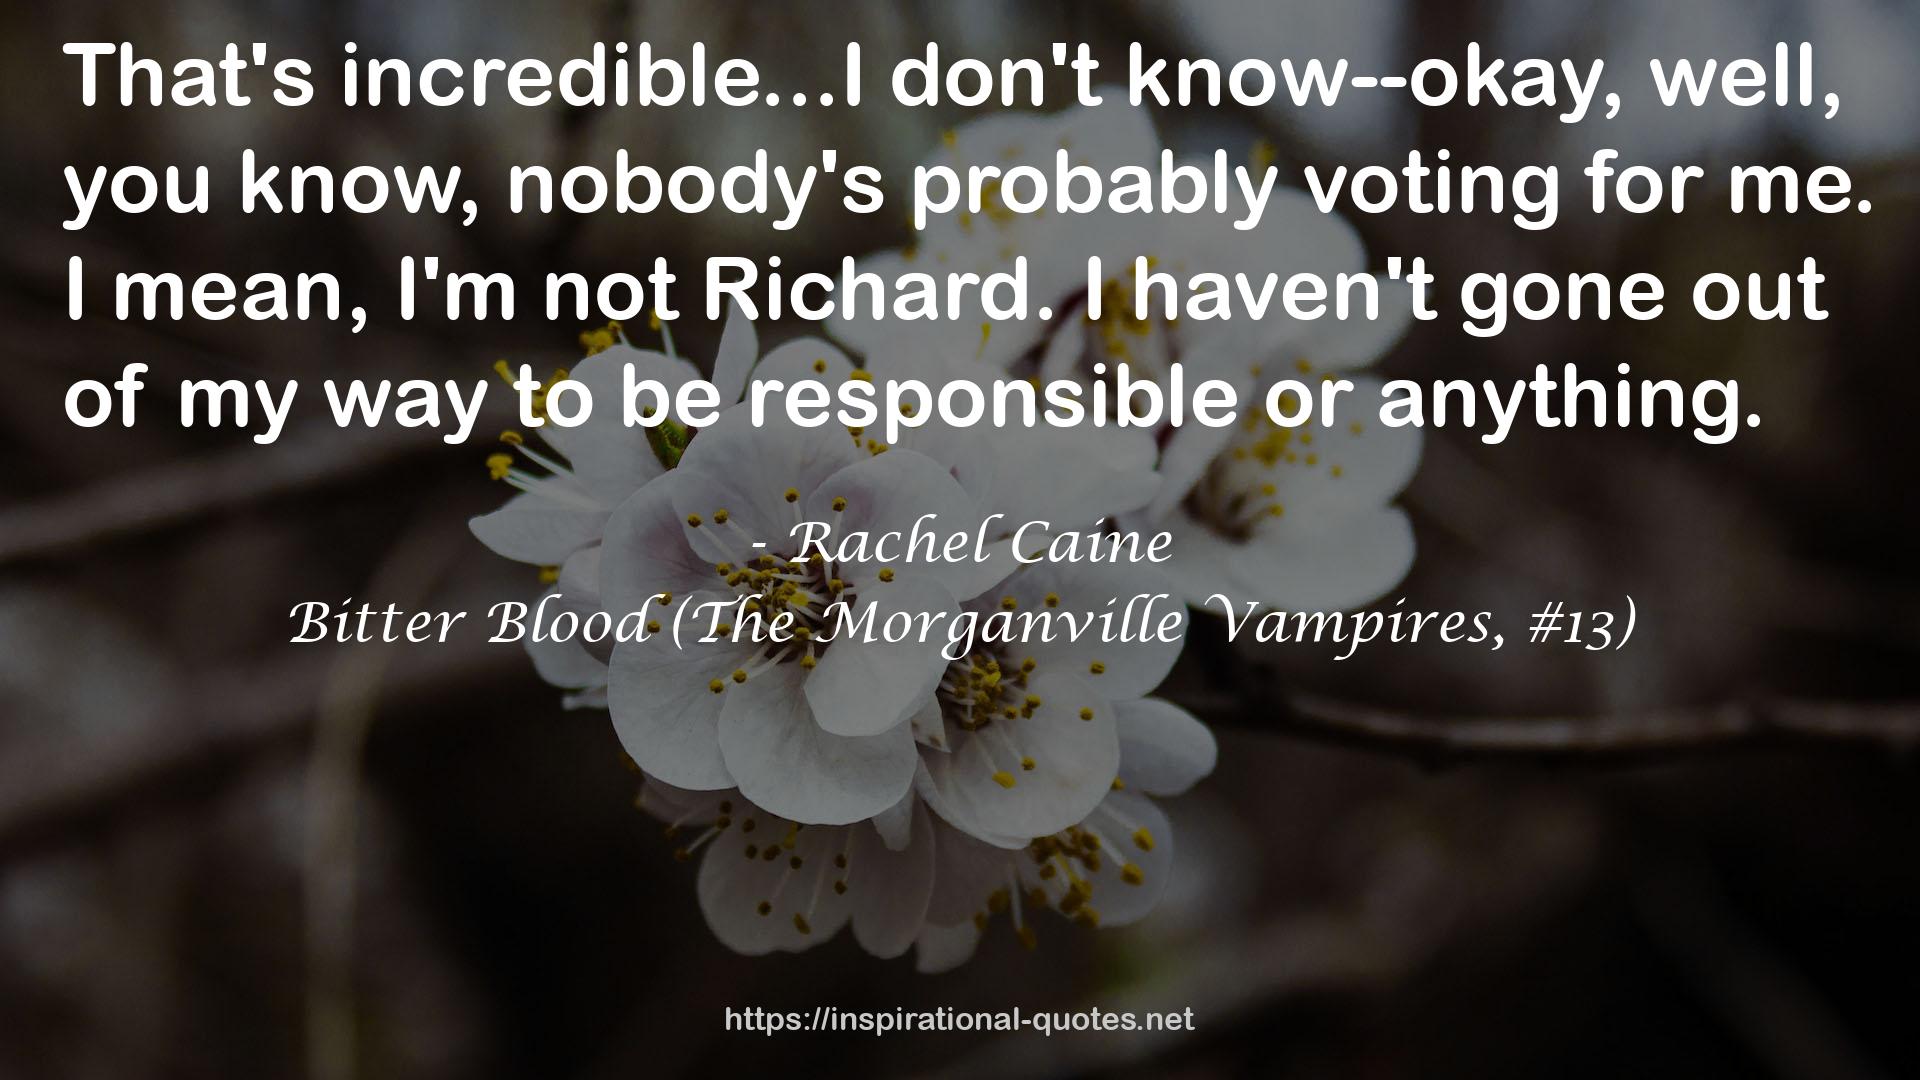 Bitter Blood (The Morganville Vampires, #13) QUOTES